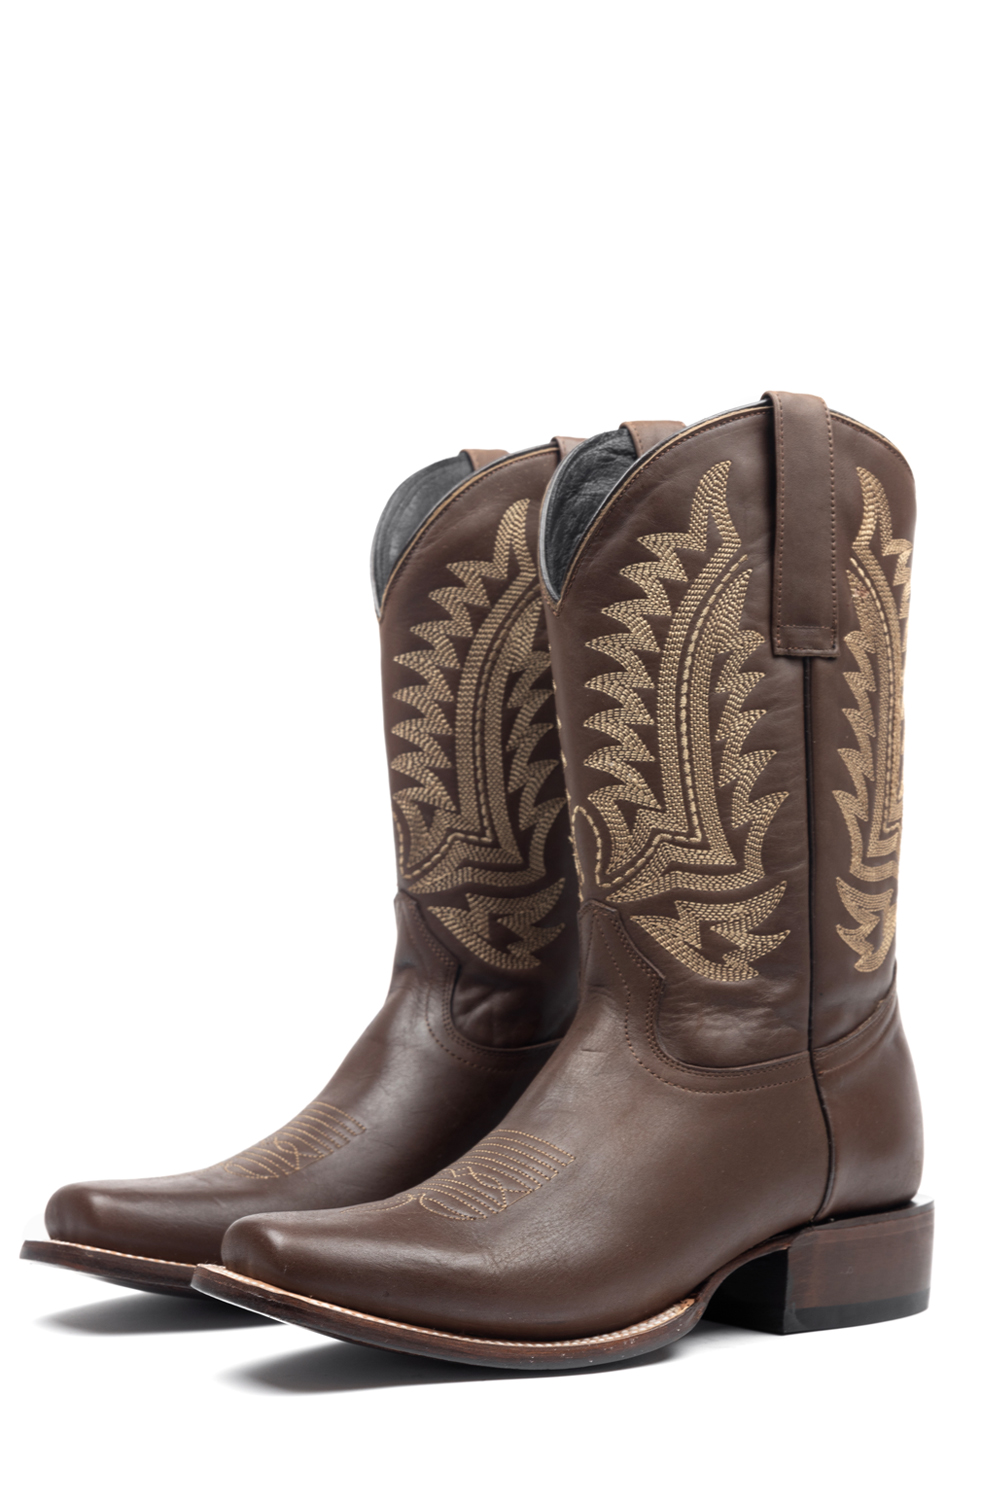 Our Products | Two Free Boots